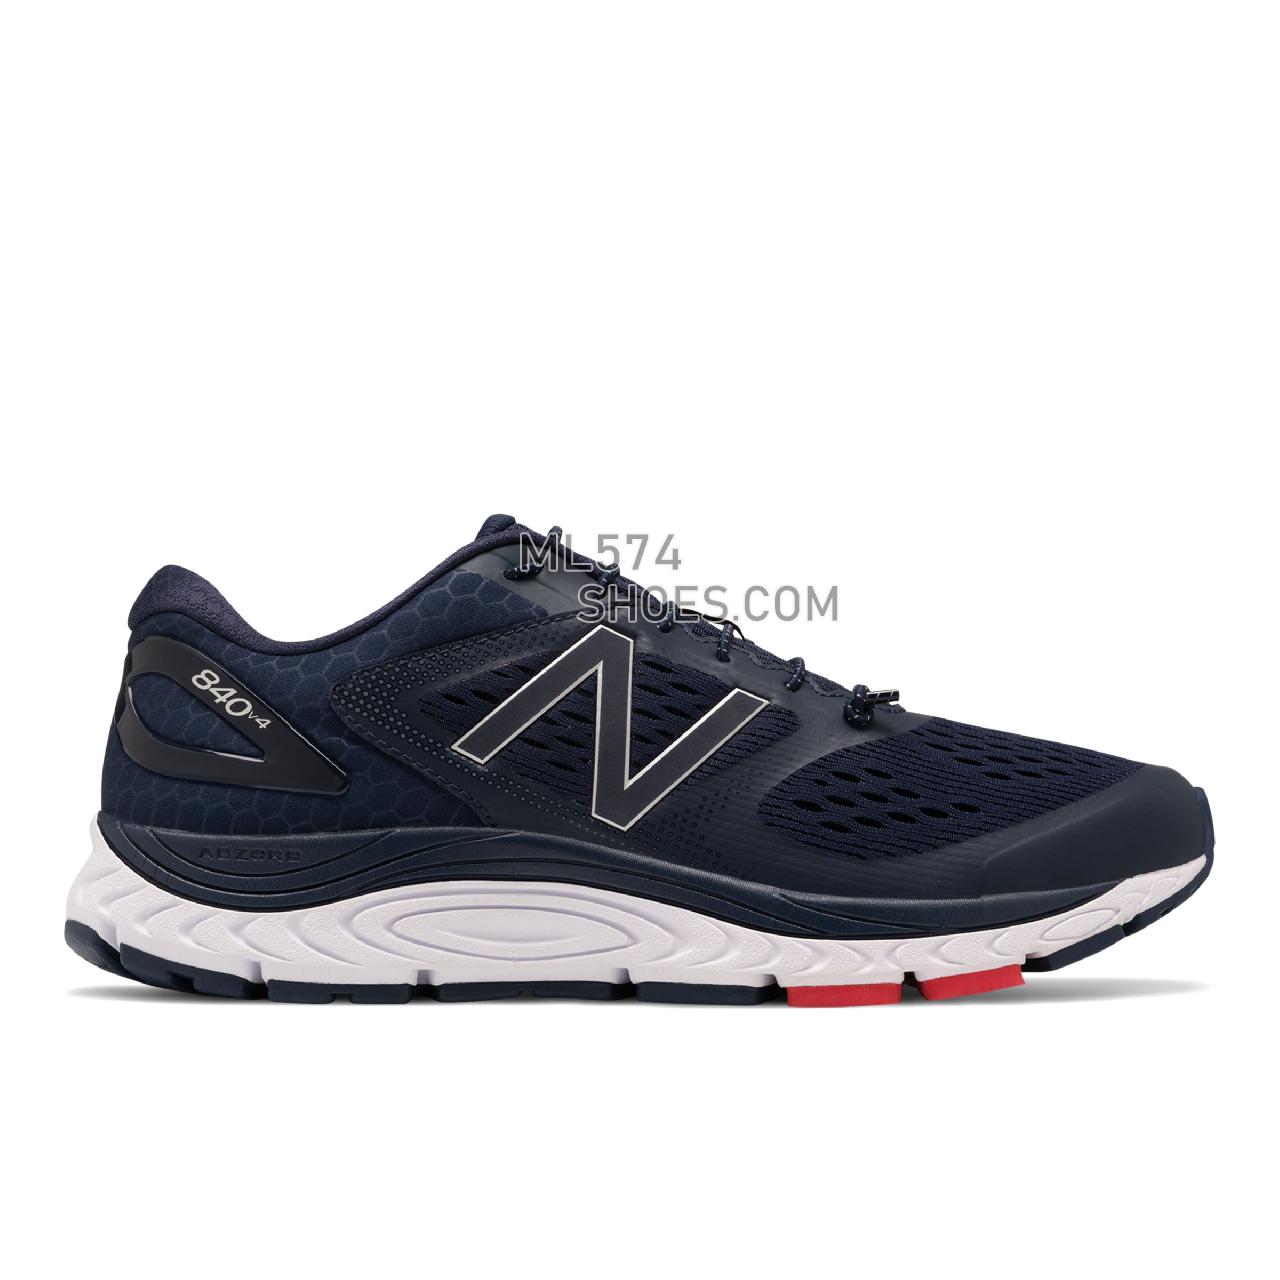 New Balance 840v4 - Men's Neutral Running - Pigment with White and Team Red - M840BP4